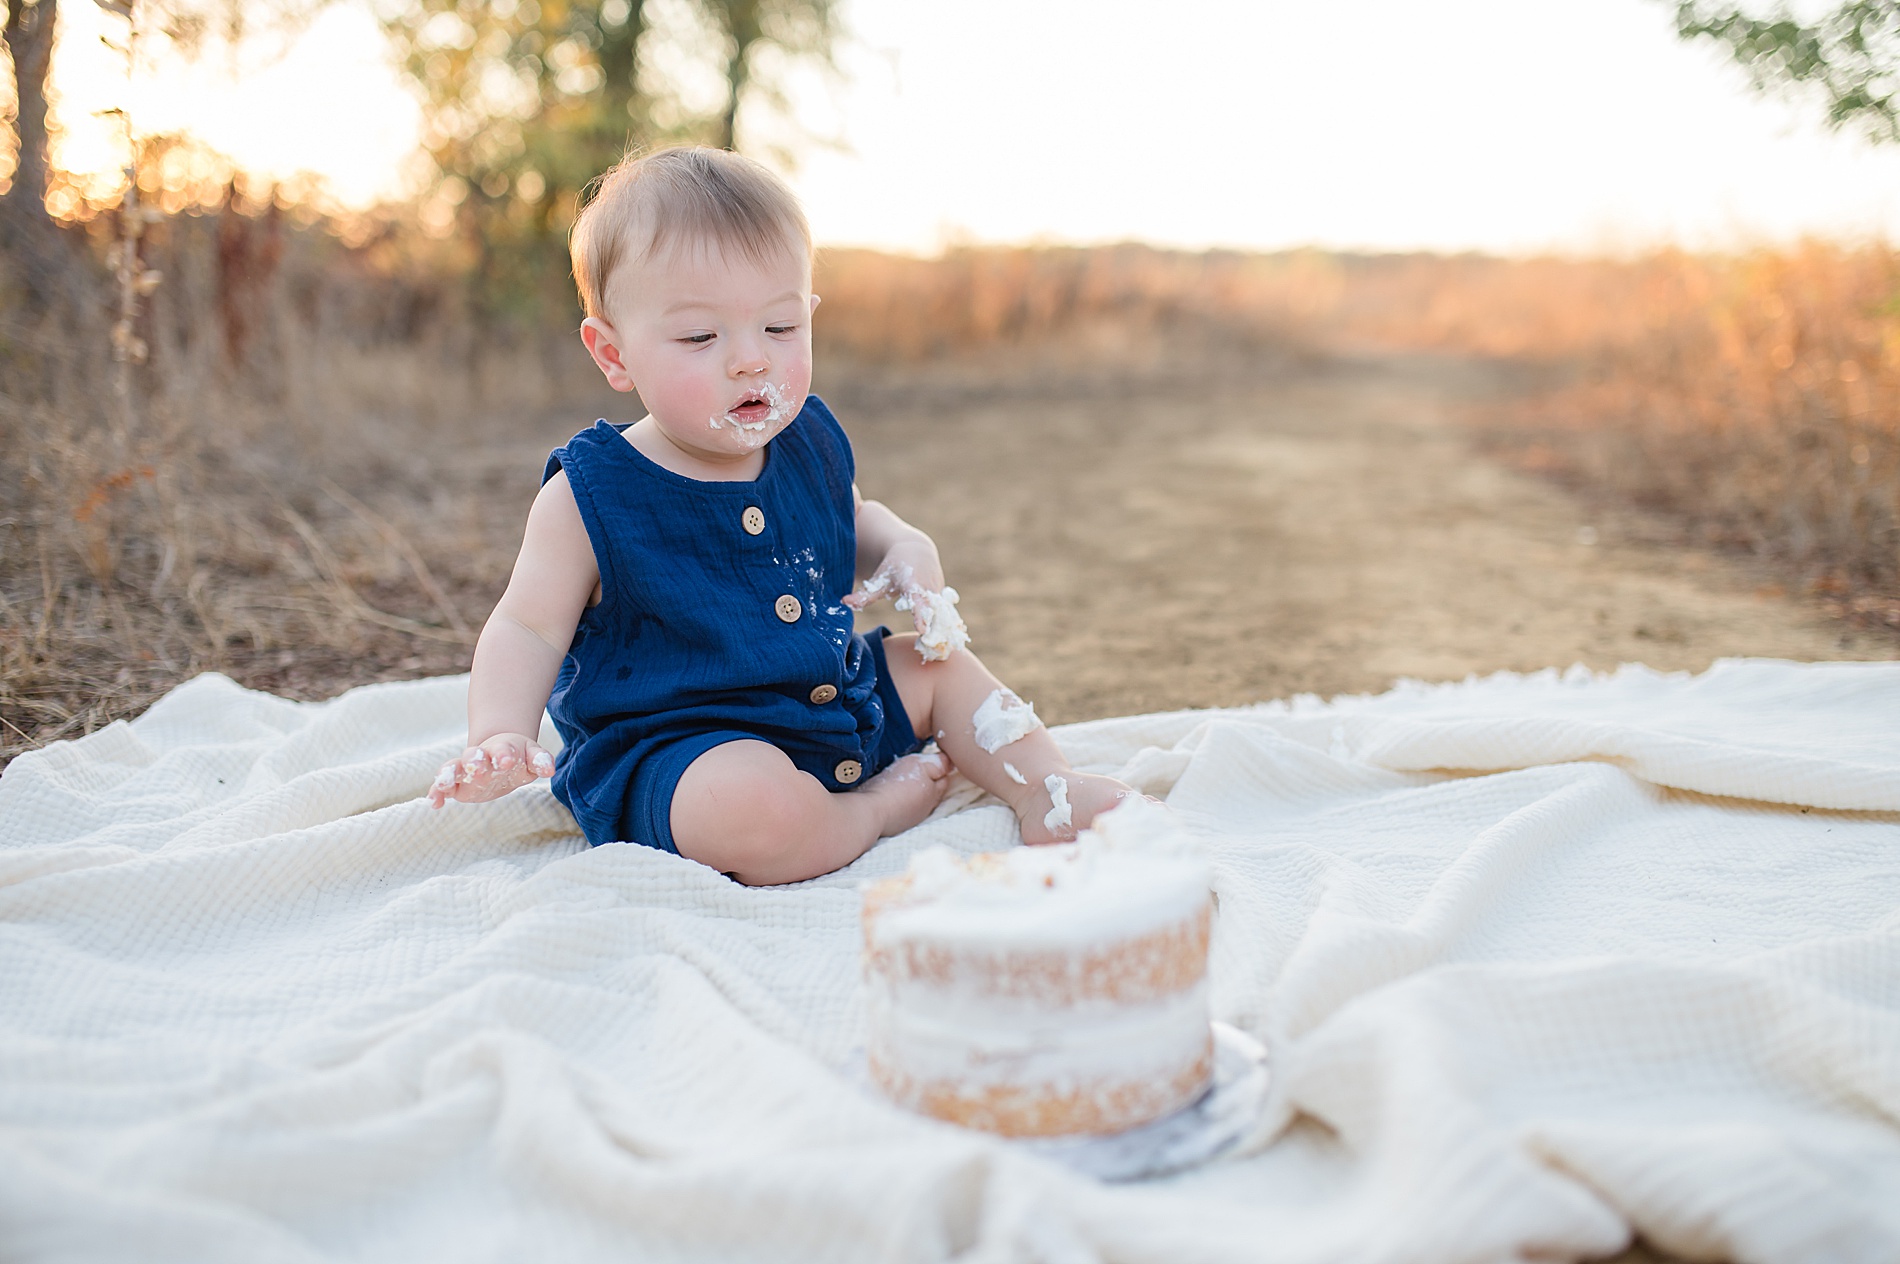 1 year cake smash session taken by Lindsey Dutton Photography, a Dallas newborn photographer
